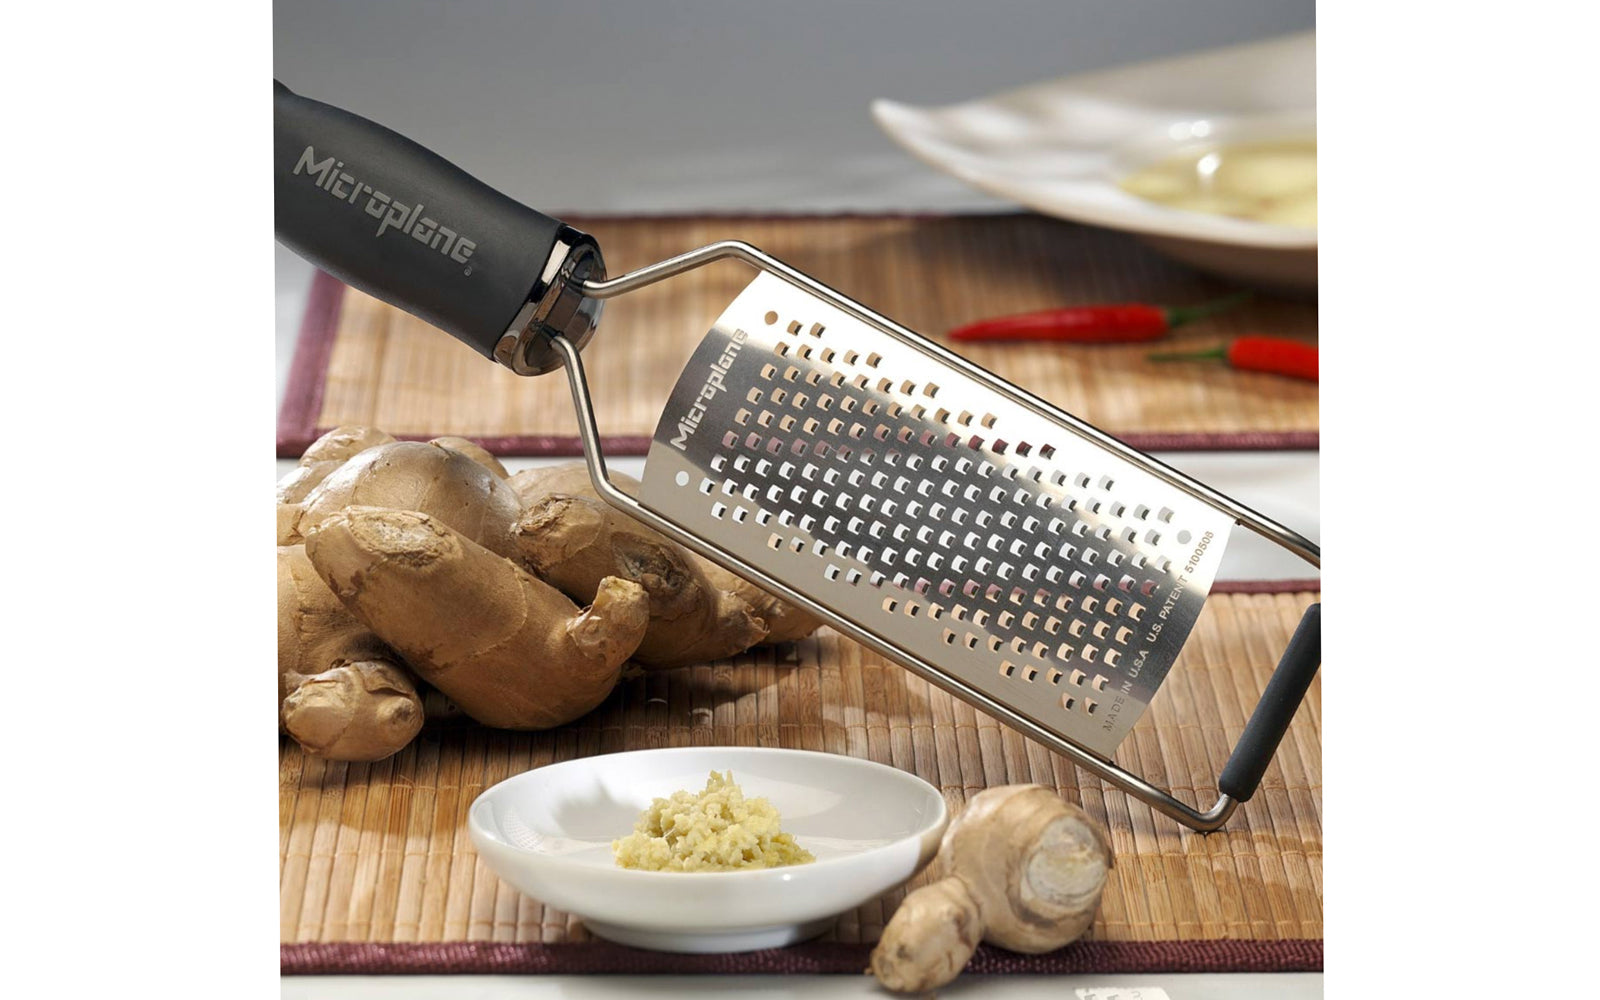 Microplane grater very coarse metal handle